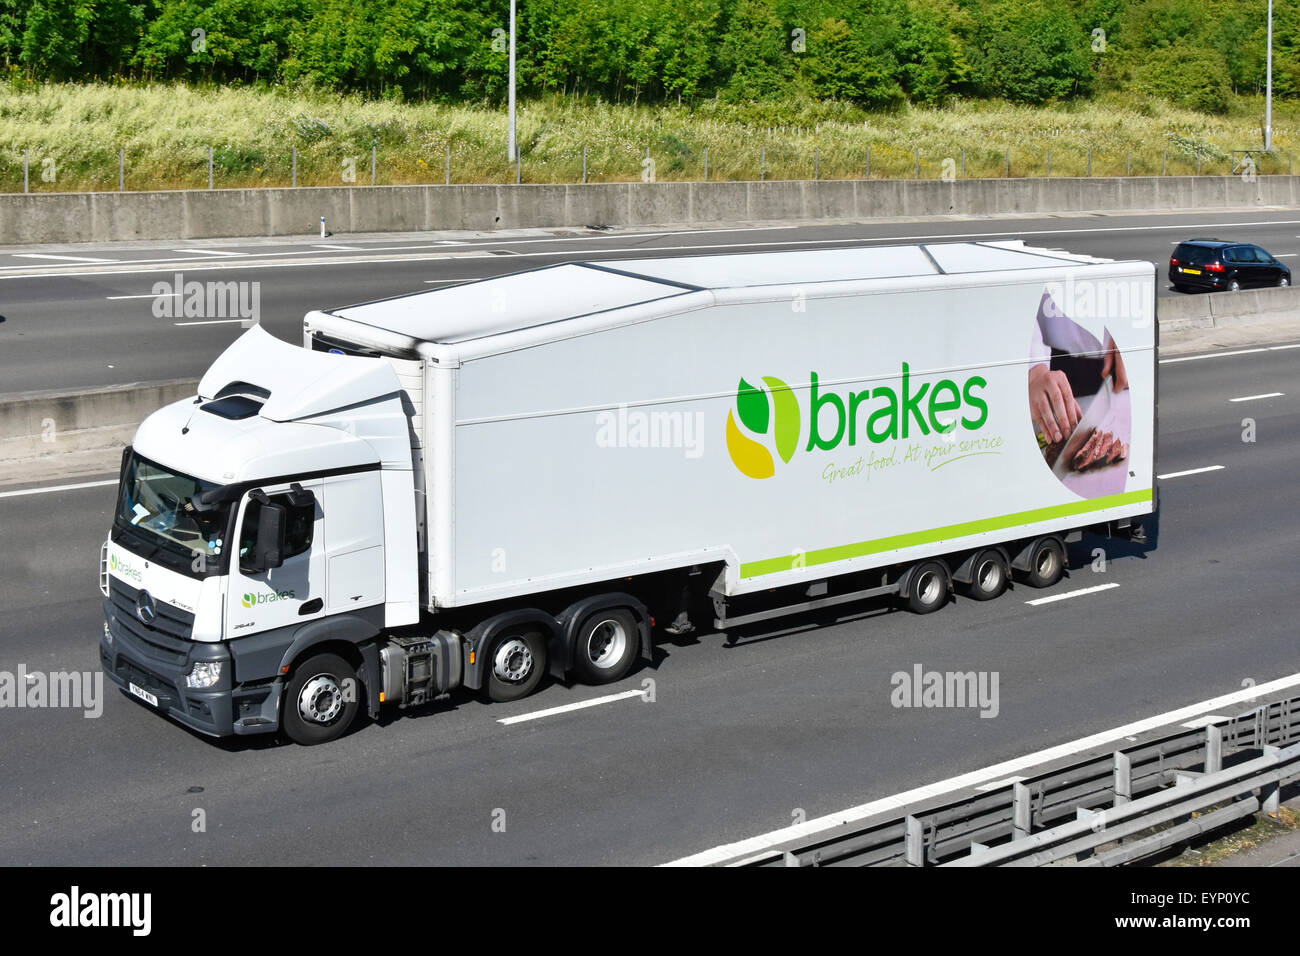 Brakes wholesale food supply chain & distribution logistics articulated trailer with advertising and hgv truck lorry driving along UK motorway England Stock Photo